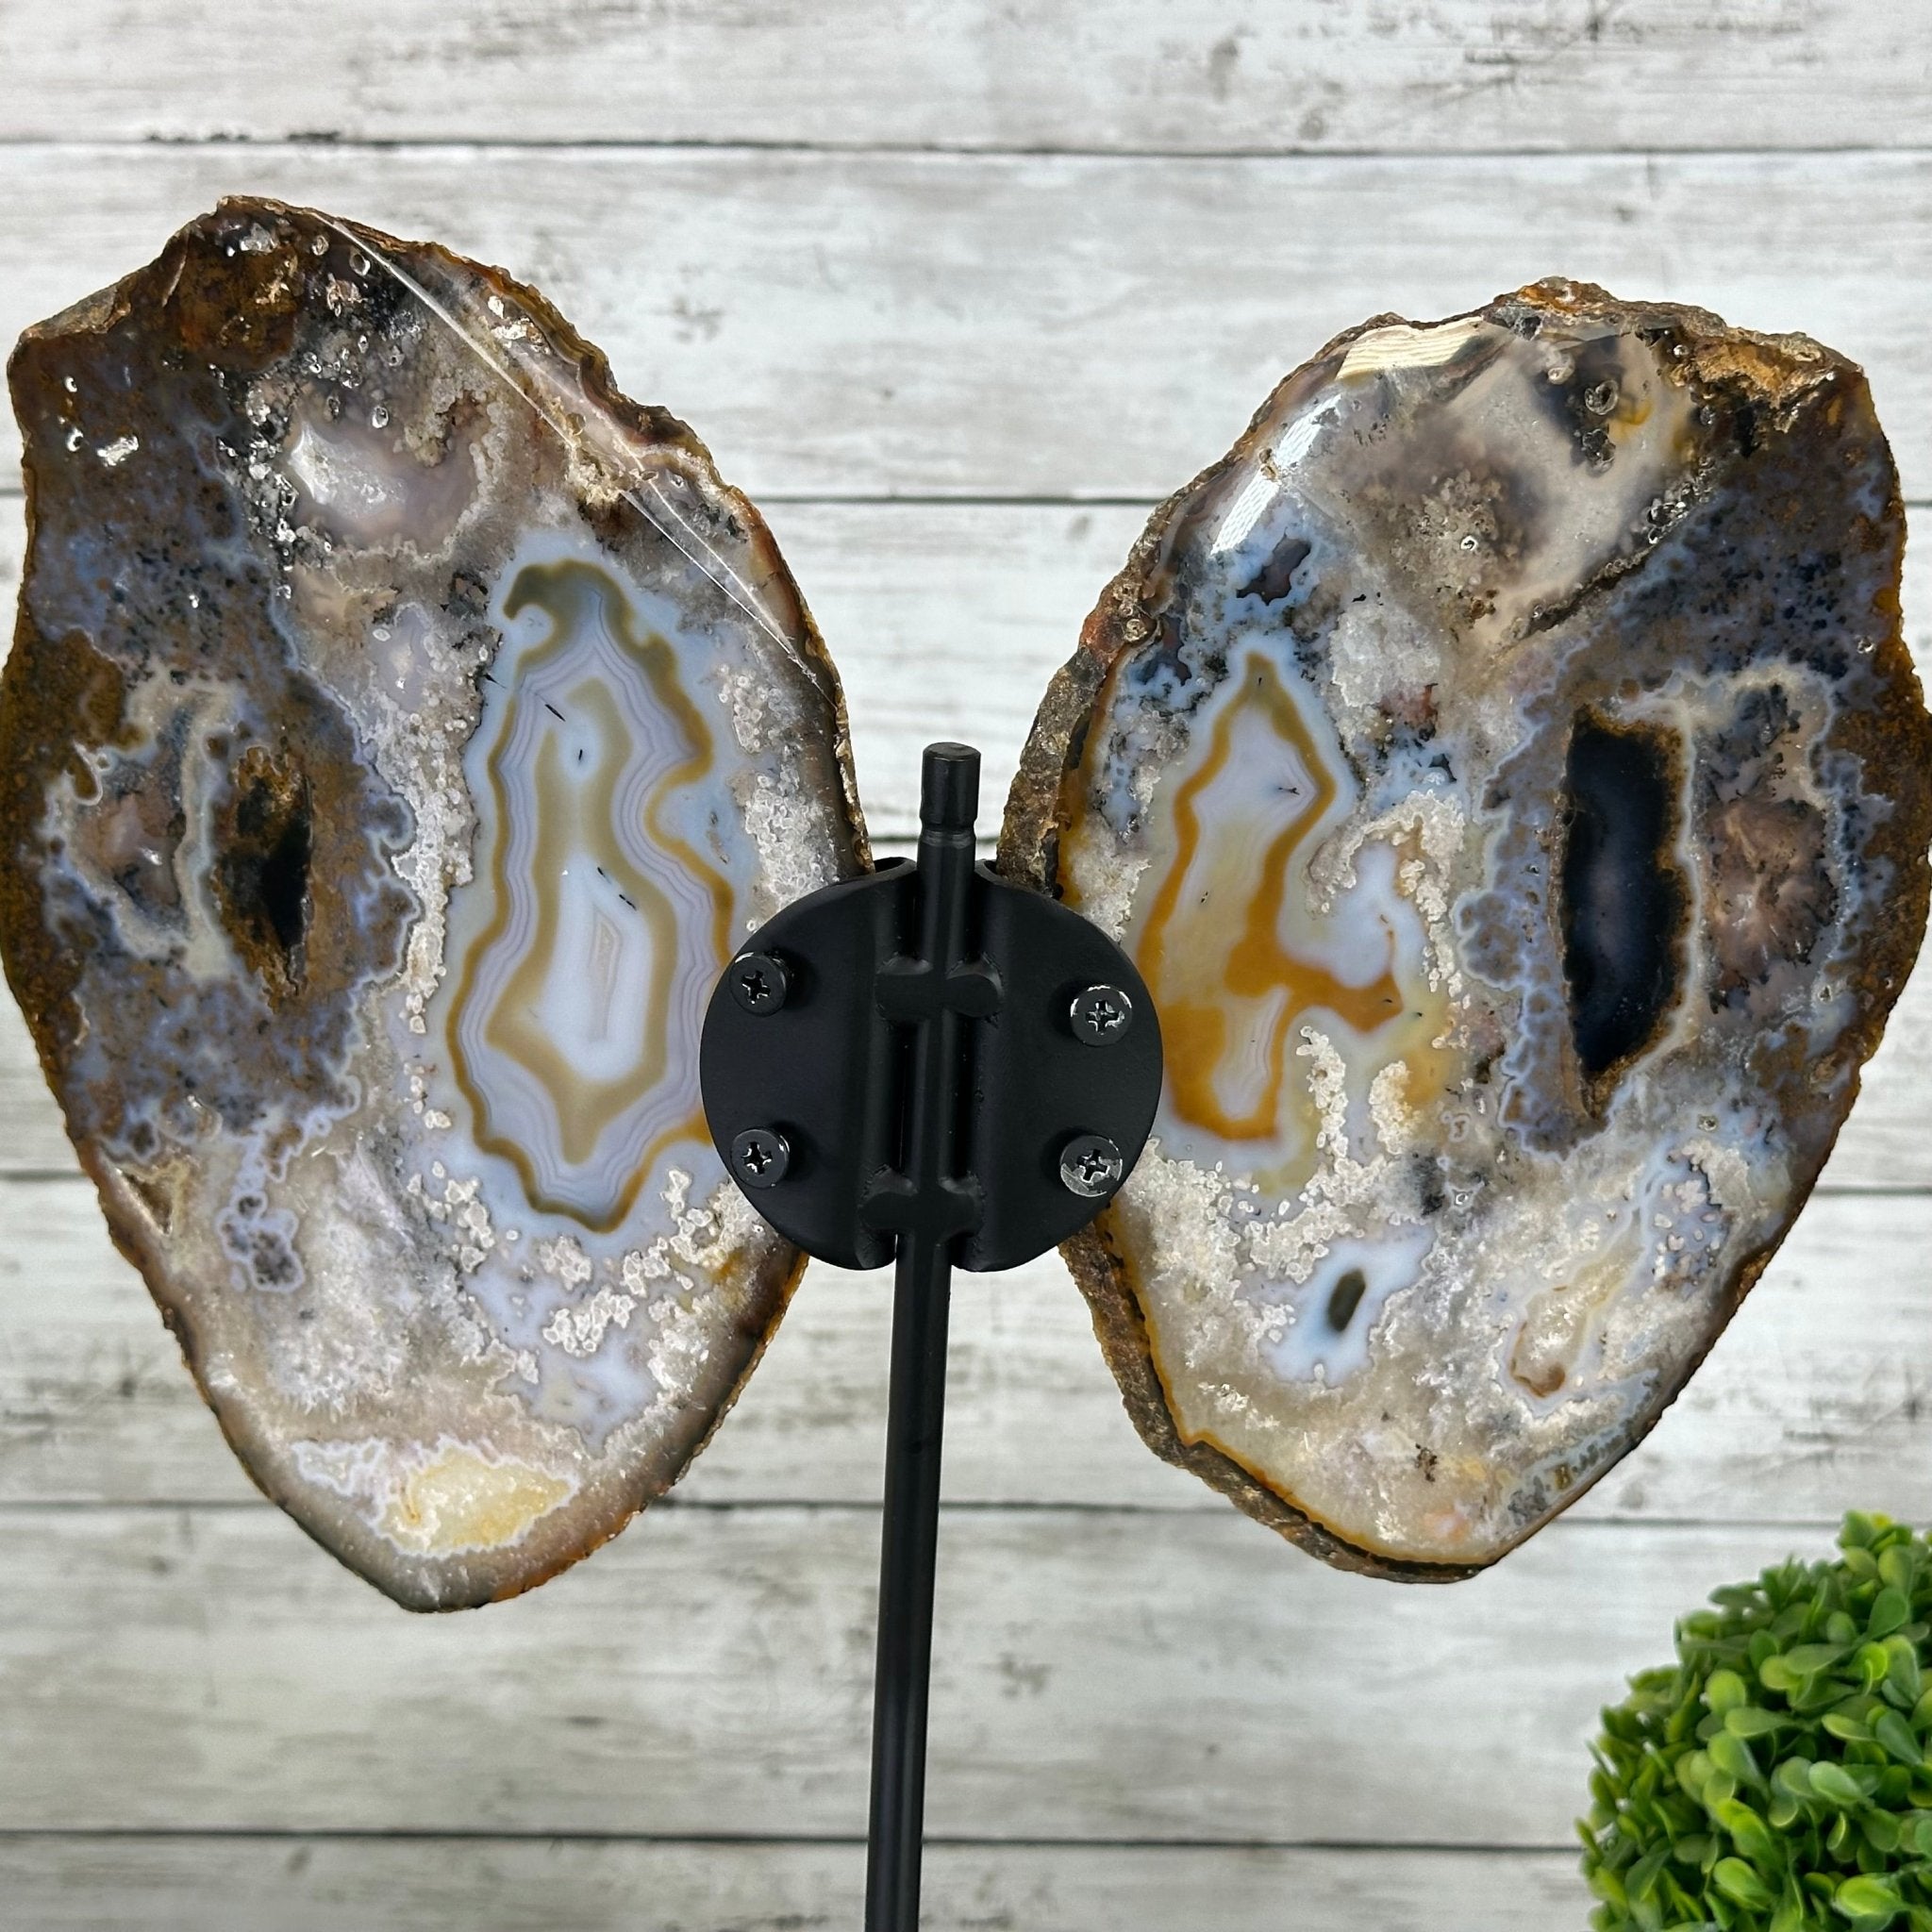 Natural Brazilian Agate "Butterfly Wings", 14.25" Tall #5050NA-079 - Brazil GemsBrazil GemsNatural Brazilian Agate "Butterfly Wings", 14.25" Tall #5050NA-079Agate Butterfly Wings5050NA-079